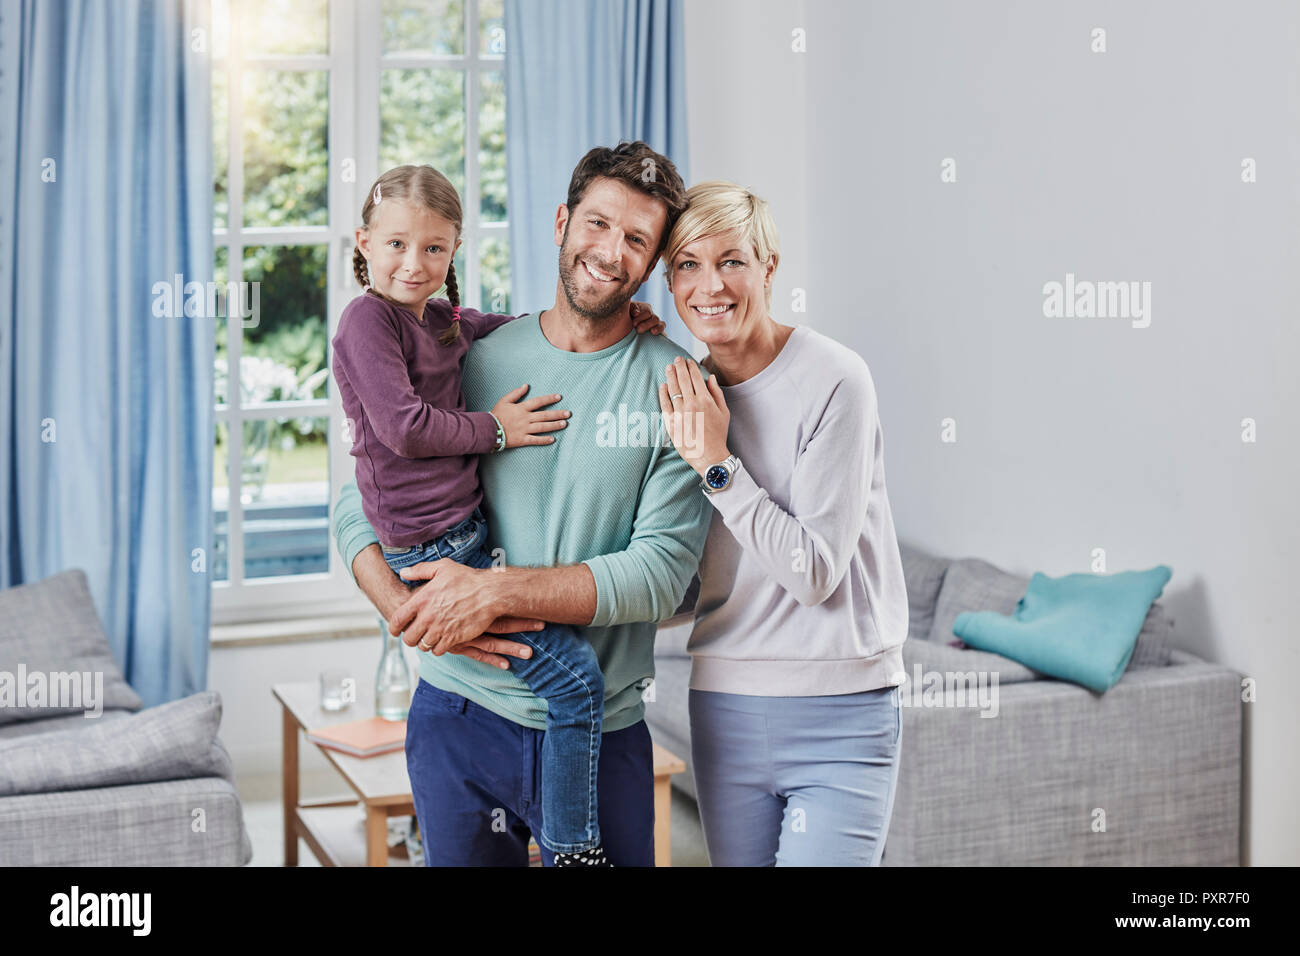 Portrait of happy parents with daughter at home Stock Photo